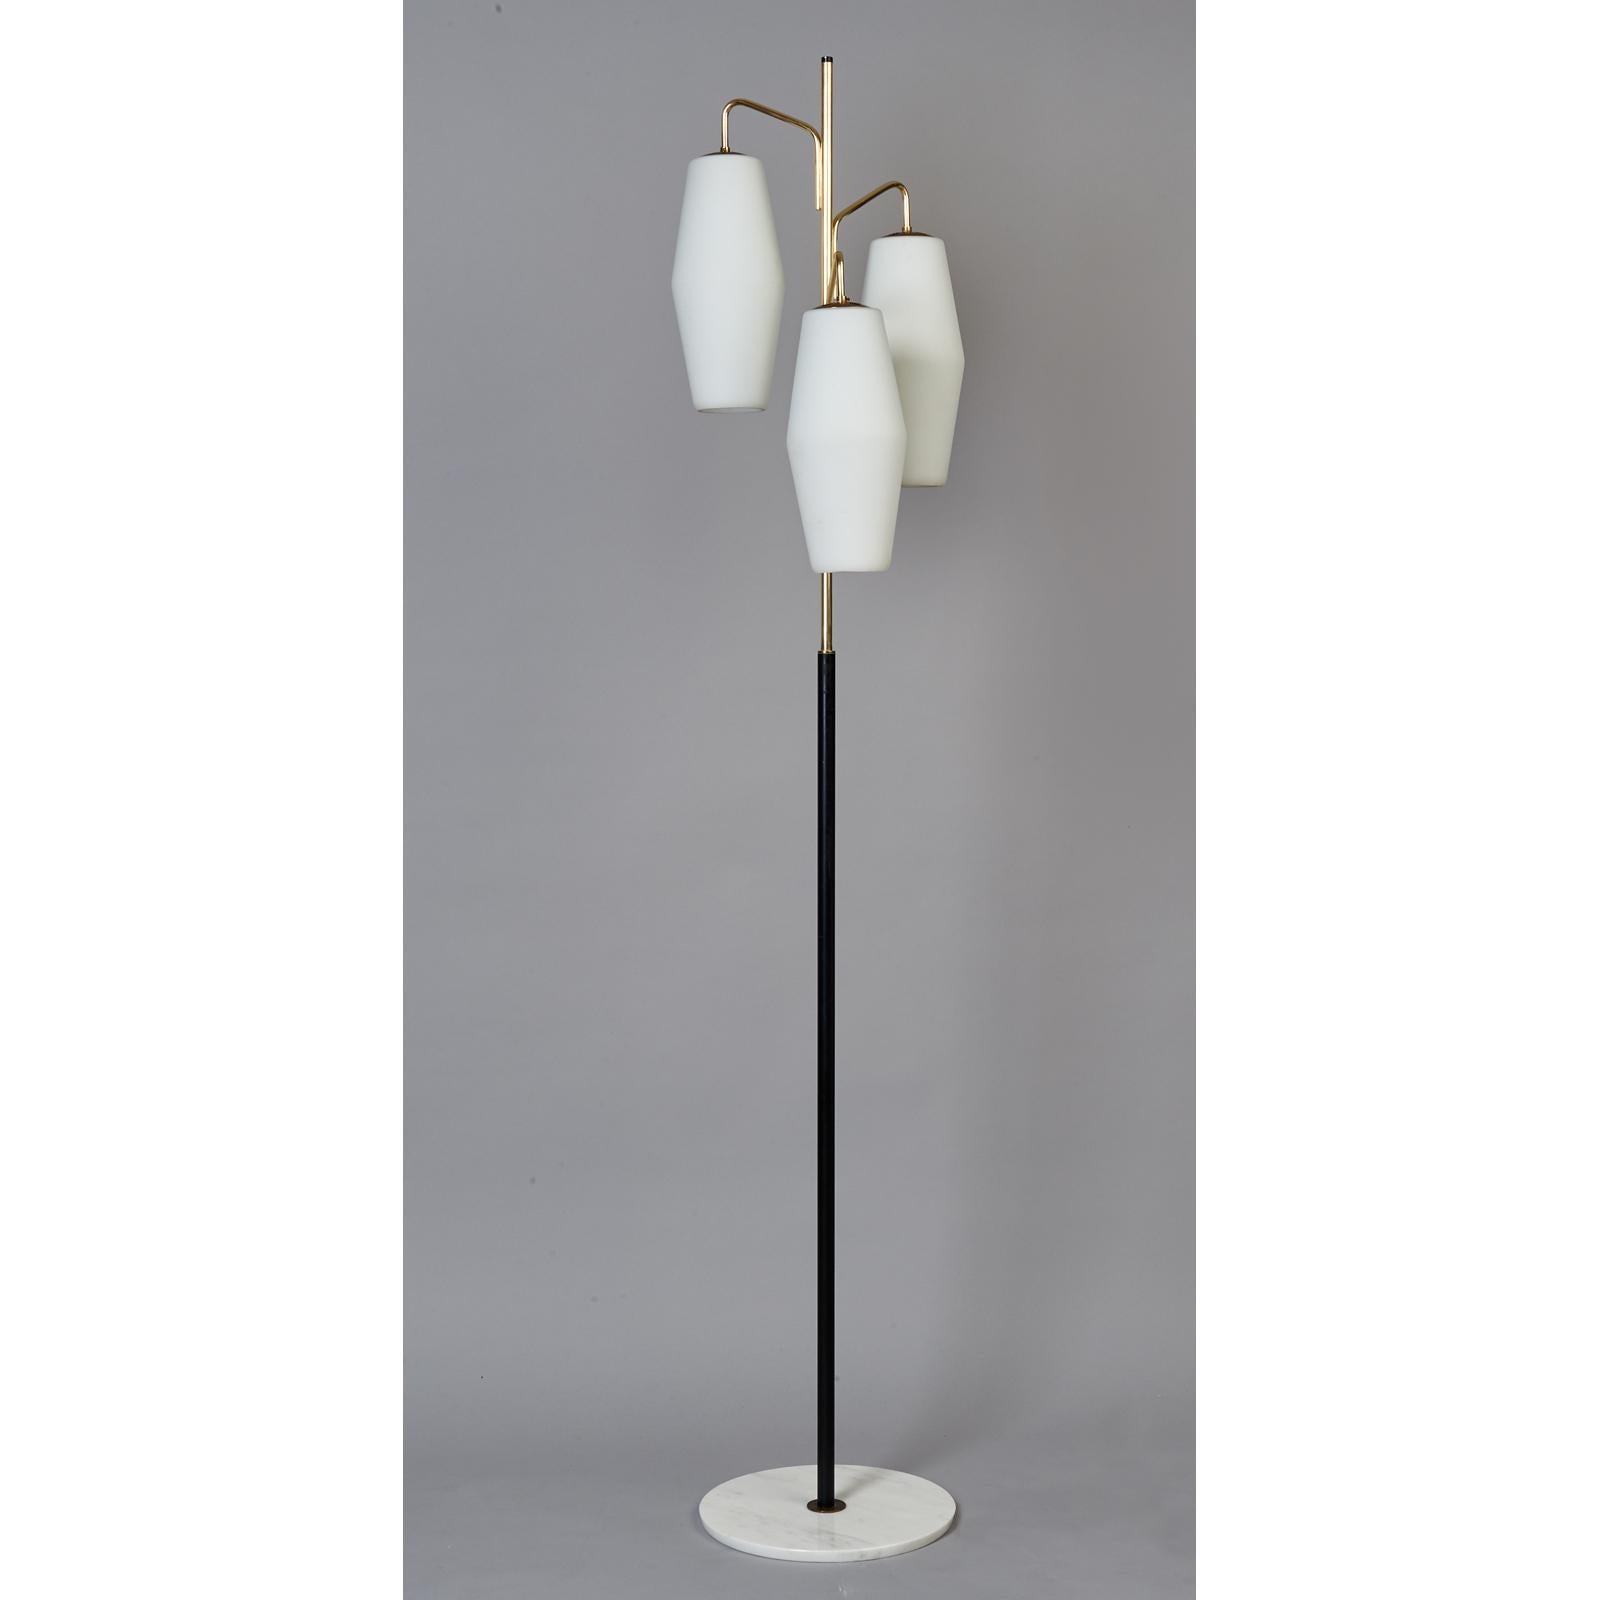 A monumental floor lamp by Stilnovo, with massive rounded hexagonal shades in thick opaline glass suspended on curved polished brass arms. The tubular black enameled shaft is anchored in a round white marble base with an elegantly angled